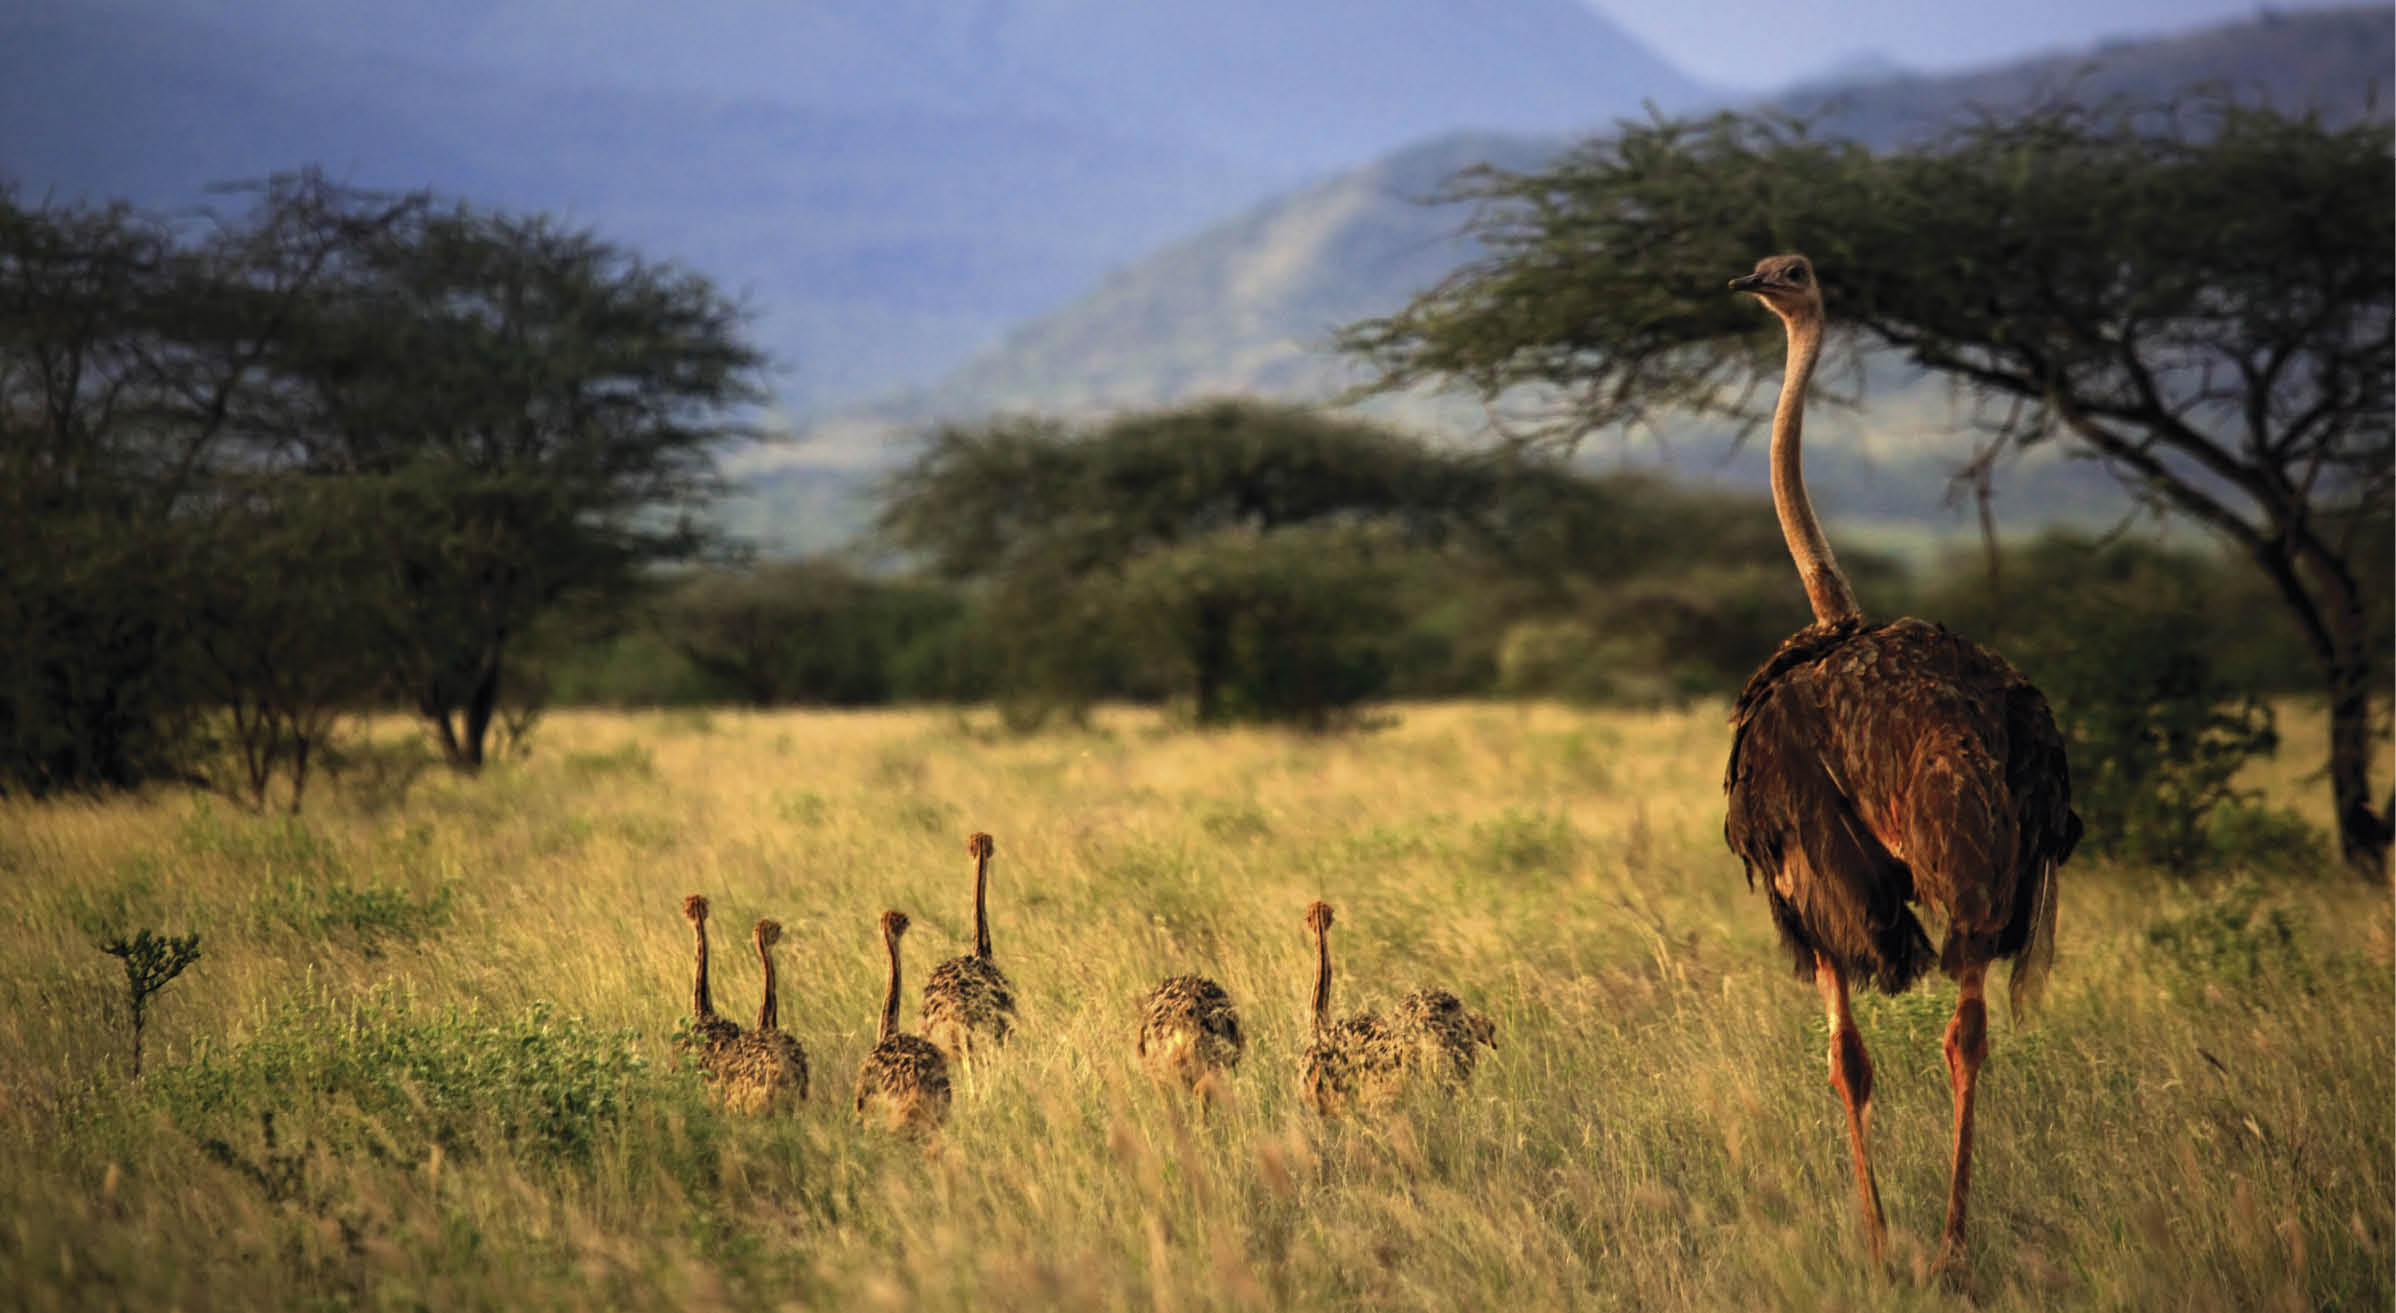 An adult ostrich with young chicks in Tsavo park. Kenya